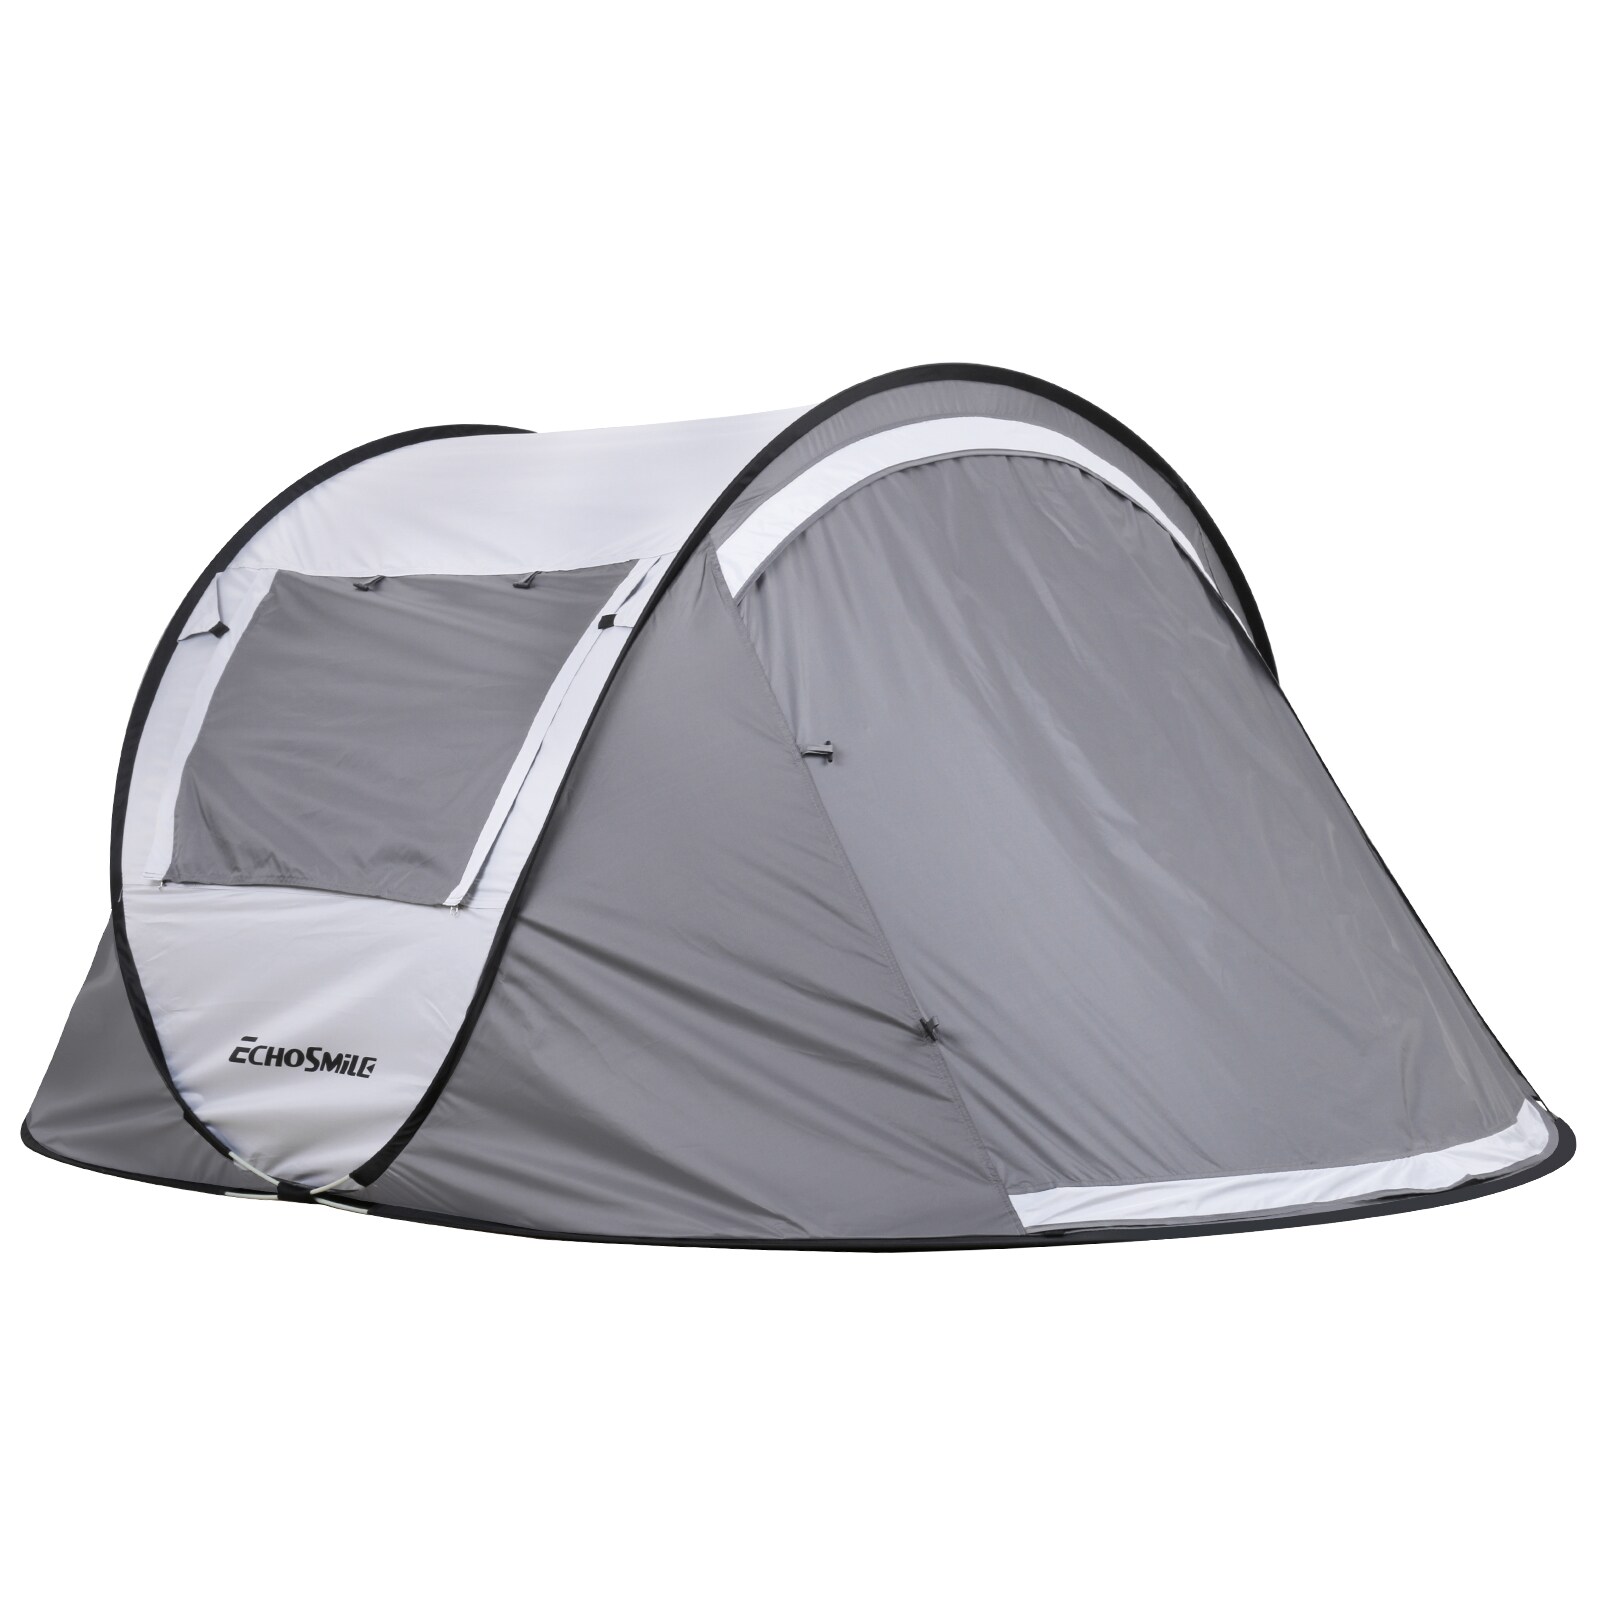 Polyester 2-Person Tent in the Tents department at Lowes.com